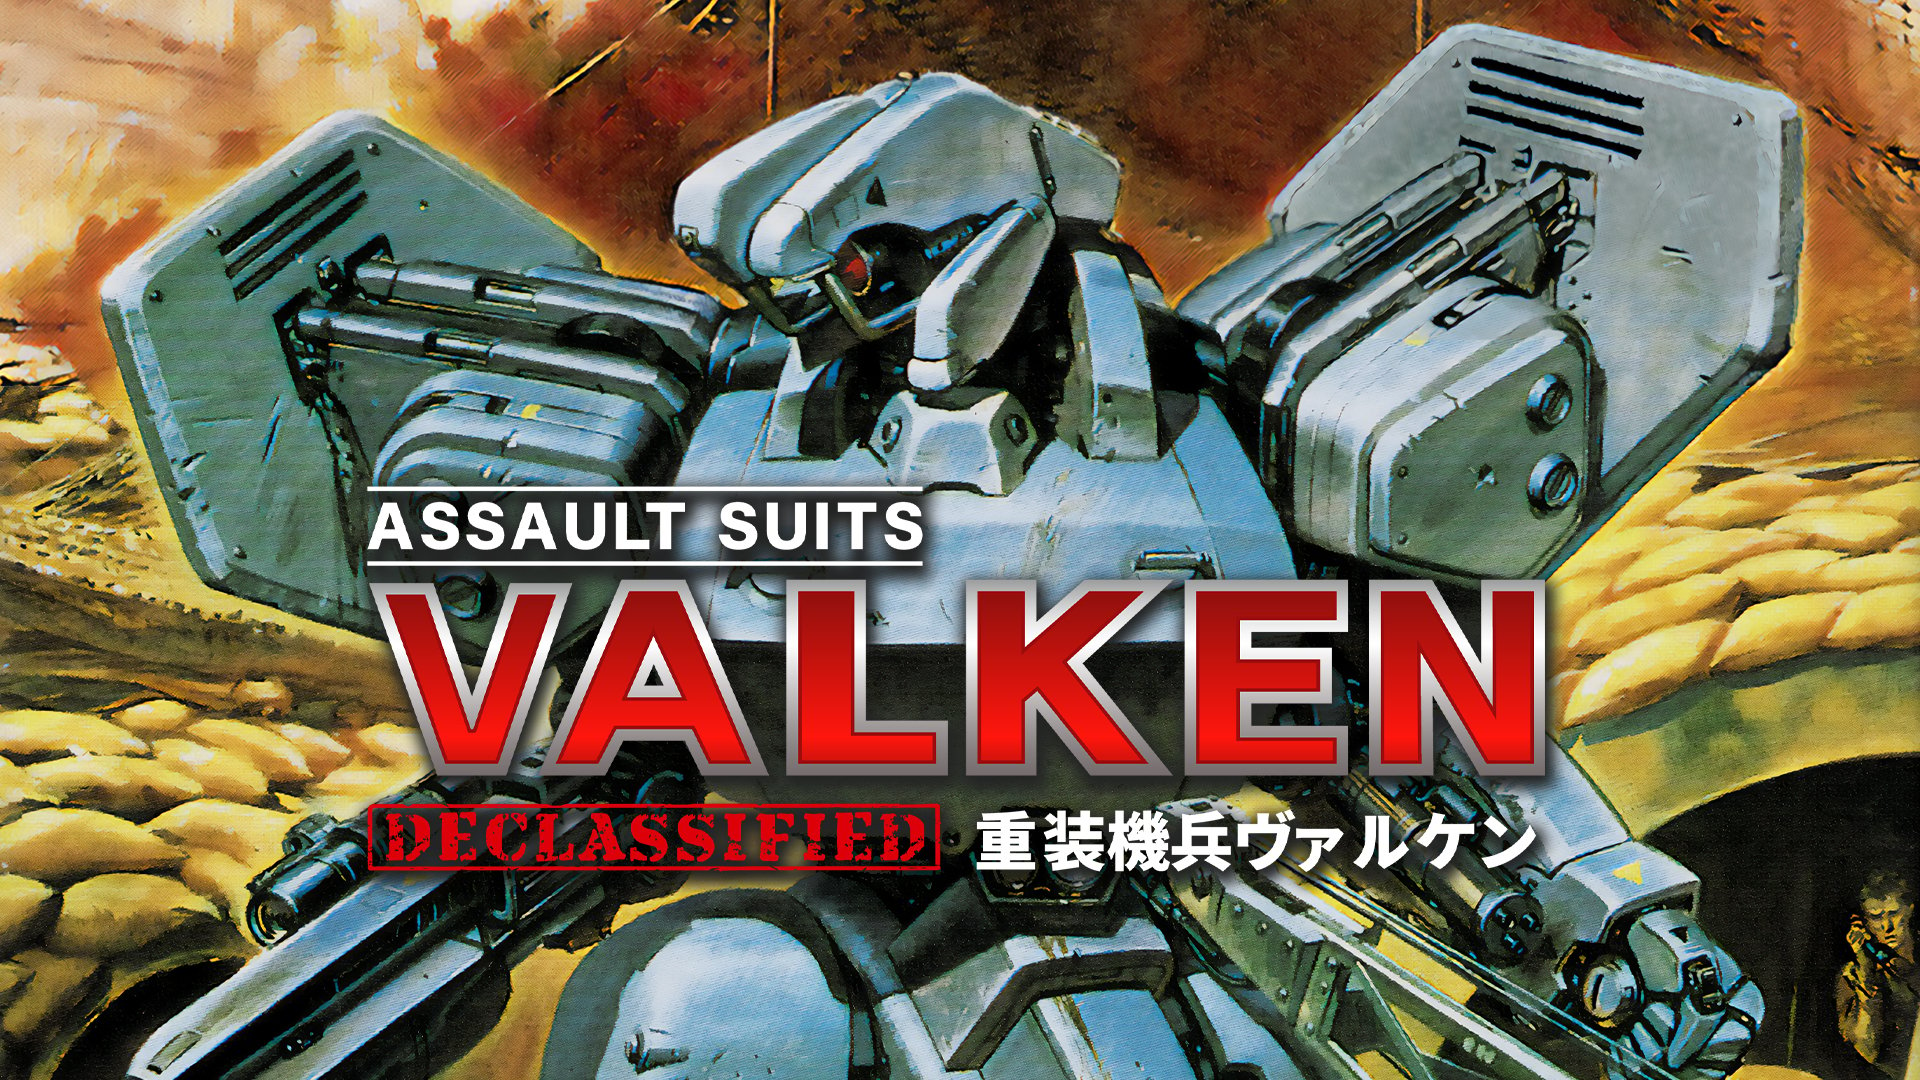 Uncensored Localization Of Assault Suits Valken Declassified Comes To Nintendo Switch